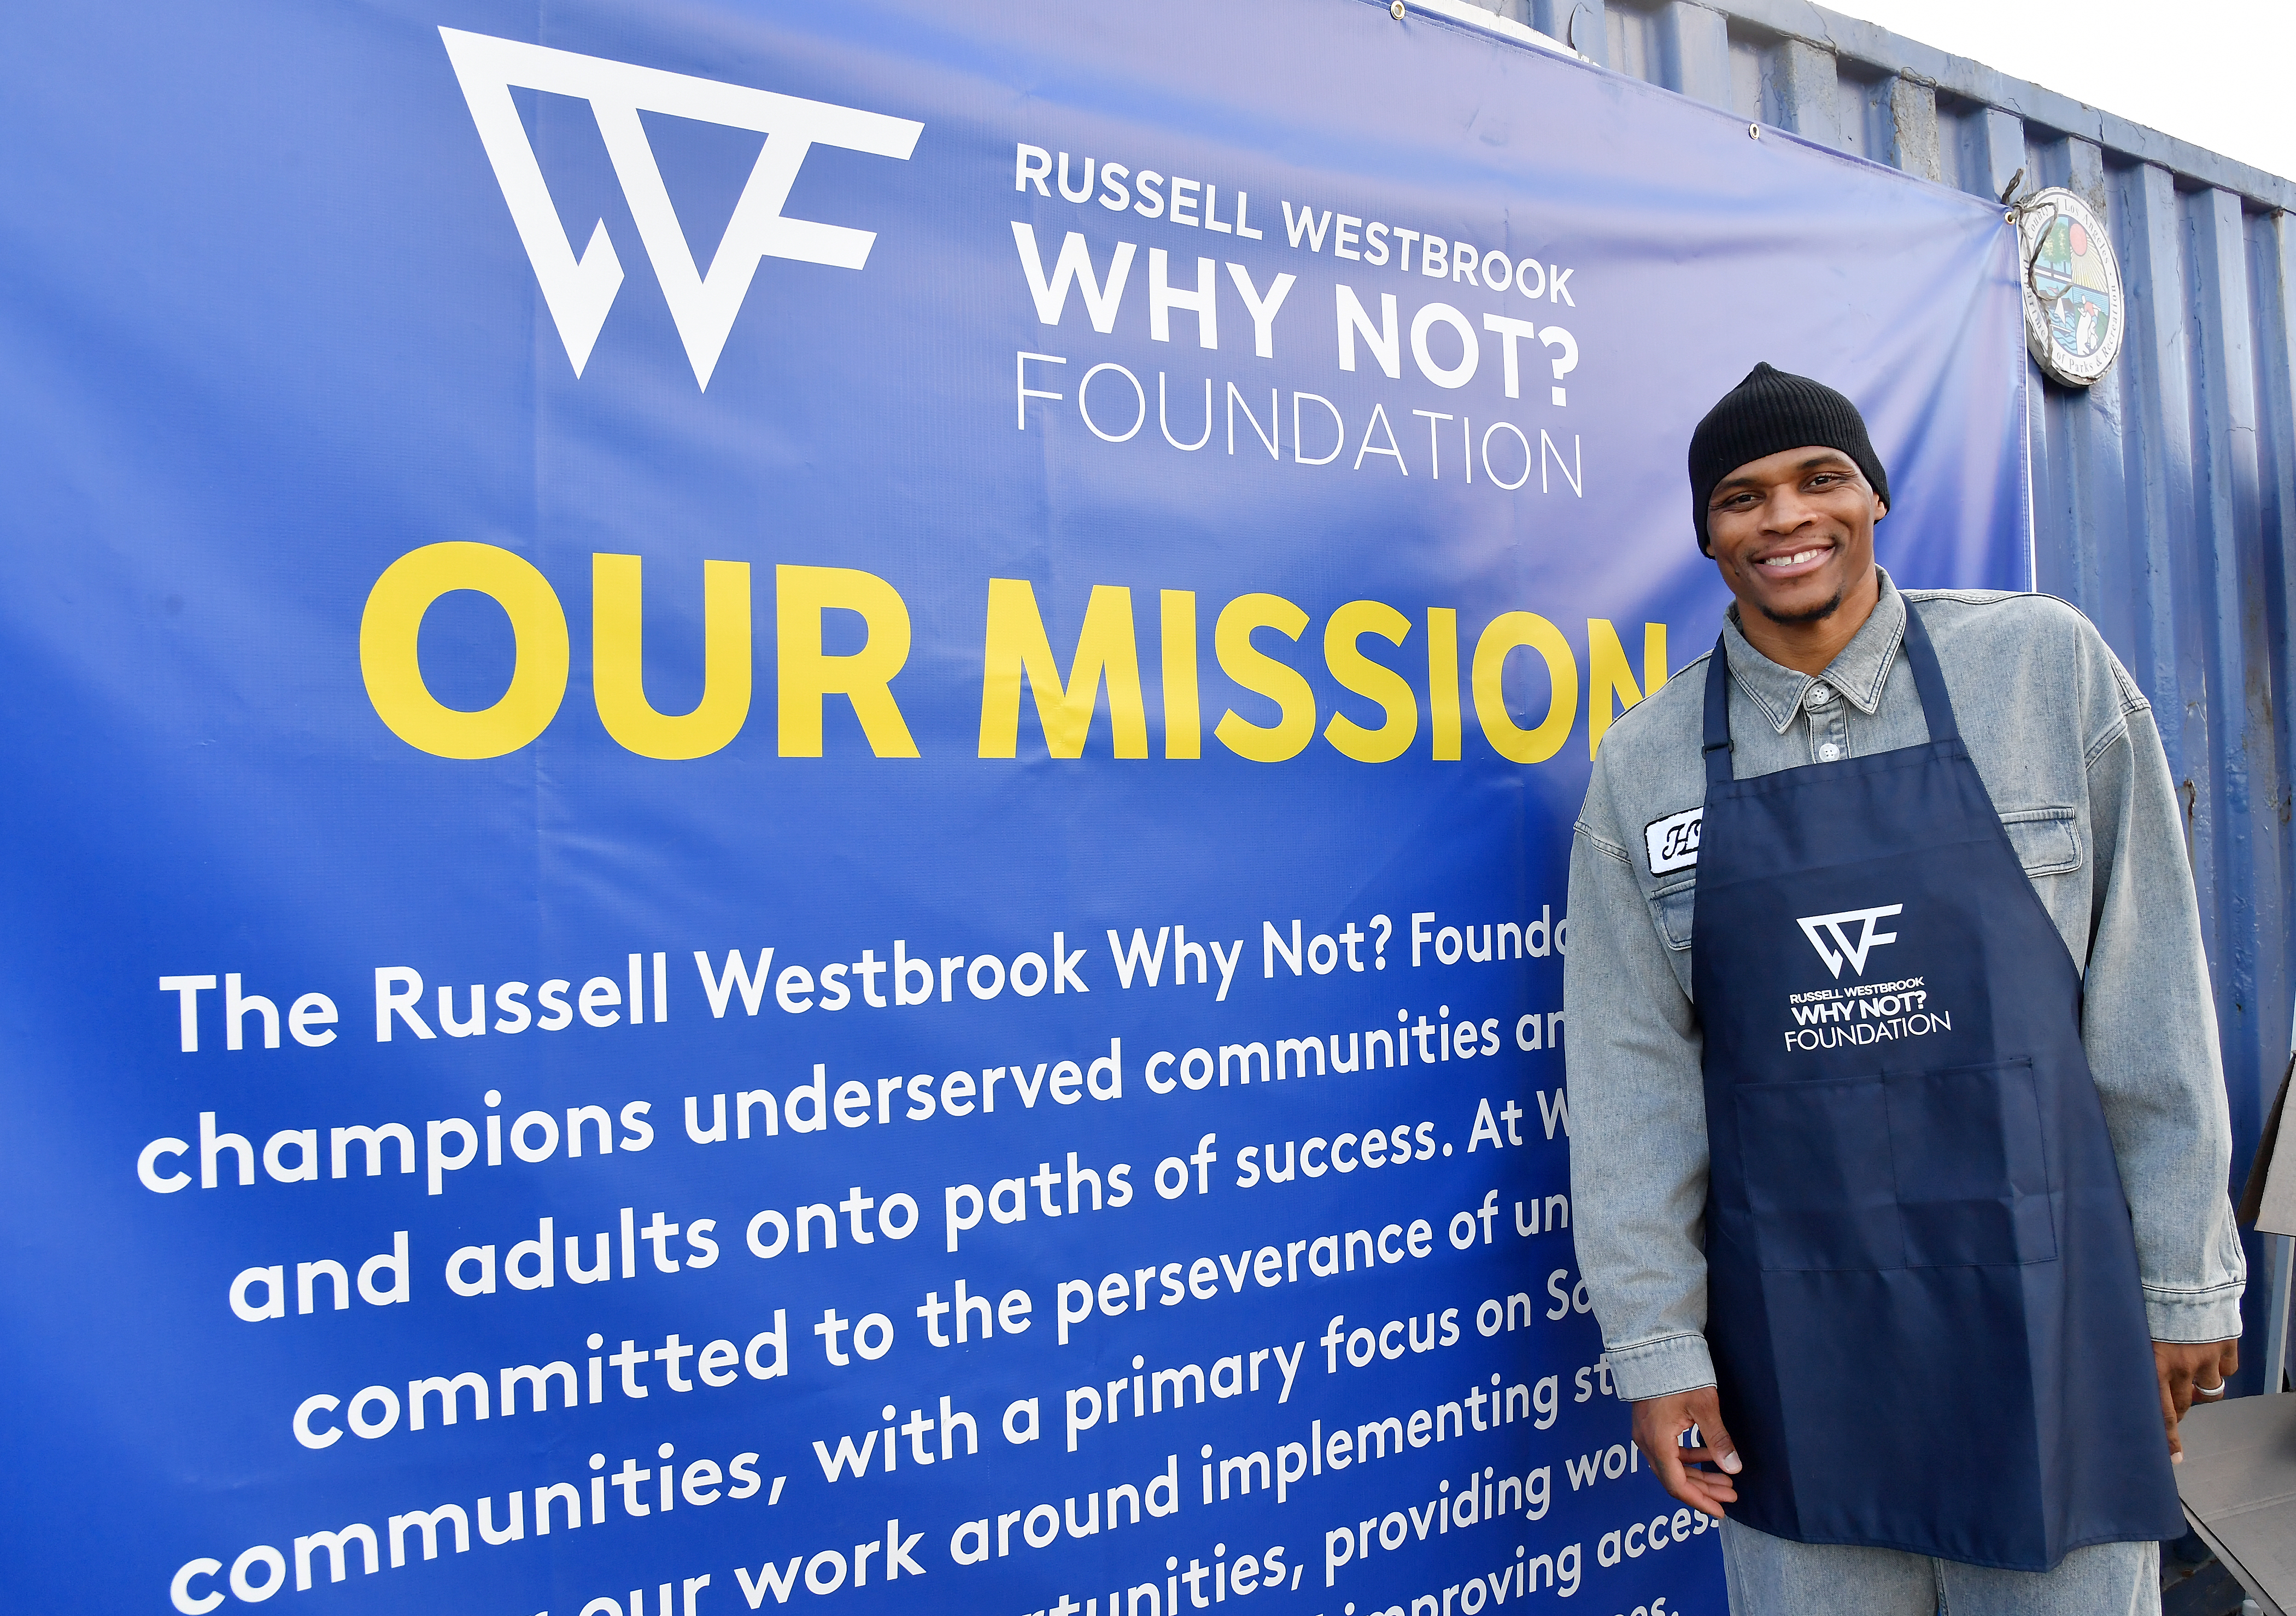 Russell Westbrook Why Not? Foundation 12th Annual Thanksgiving Food Distribution Event